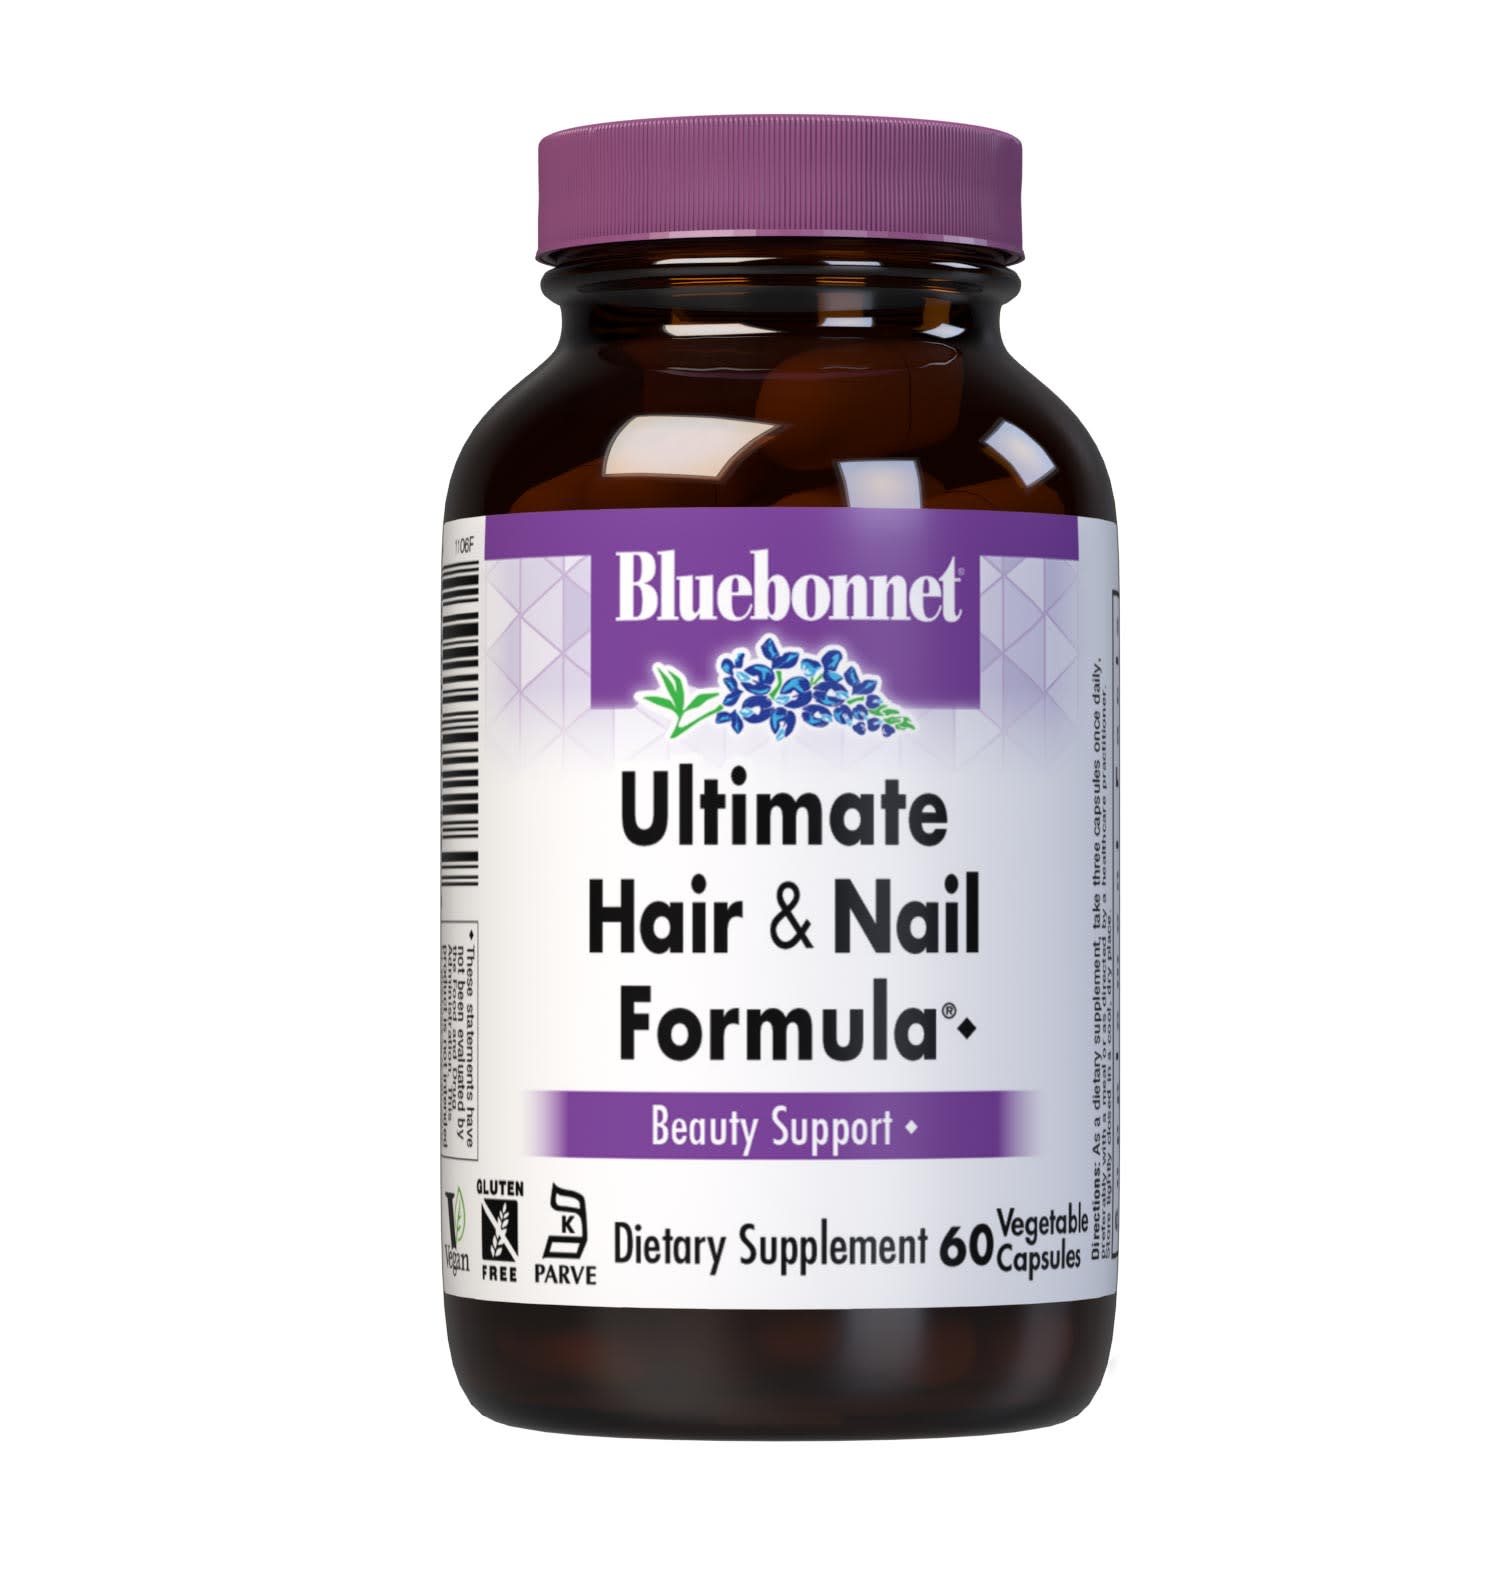 Bluebonnet’s Ultimate Hair & Nail Formula 60 Vegetable Capsules are specially formulated with high potency vitamins, minerals, amino acids, horsetail silica, and OptiMSM a superior form of active sulphur, for optimal hair and nail support. #size_60 count